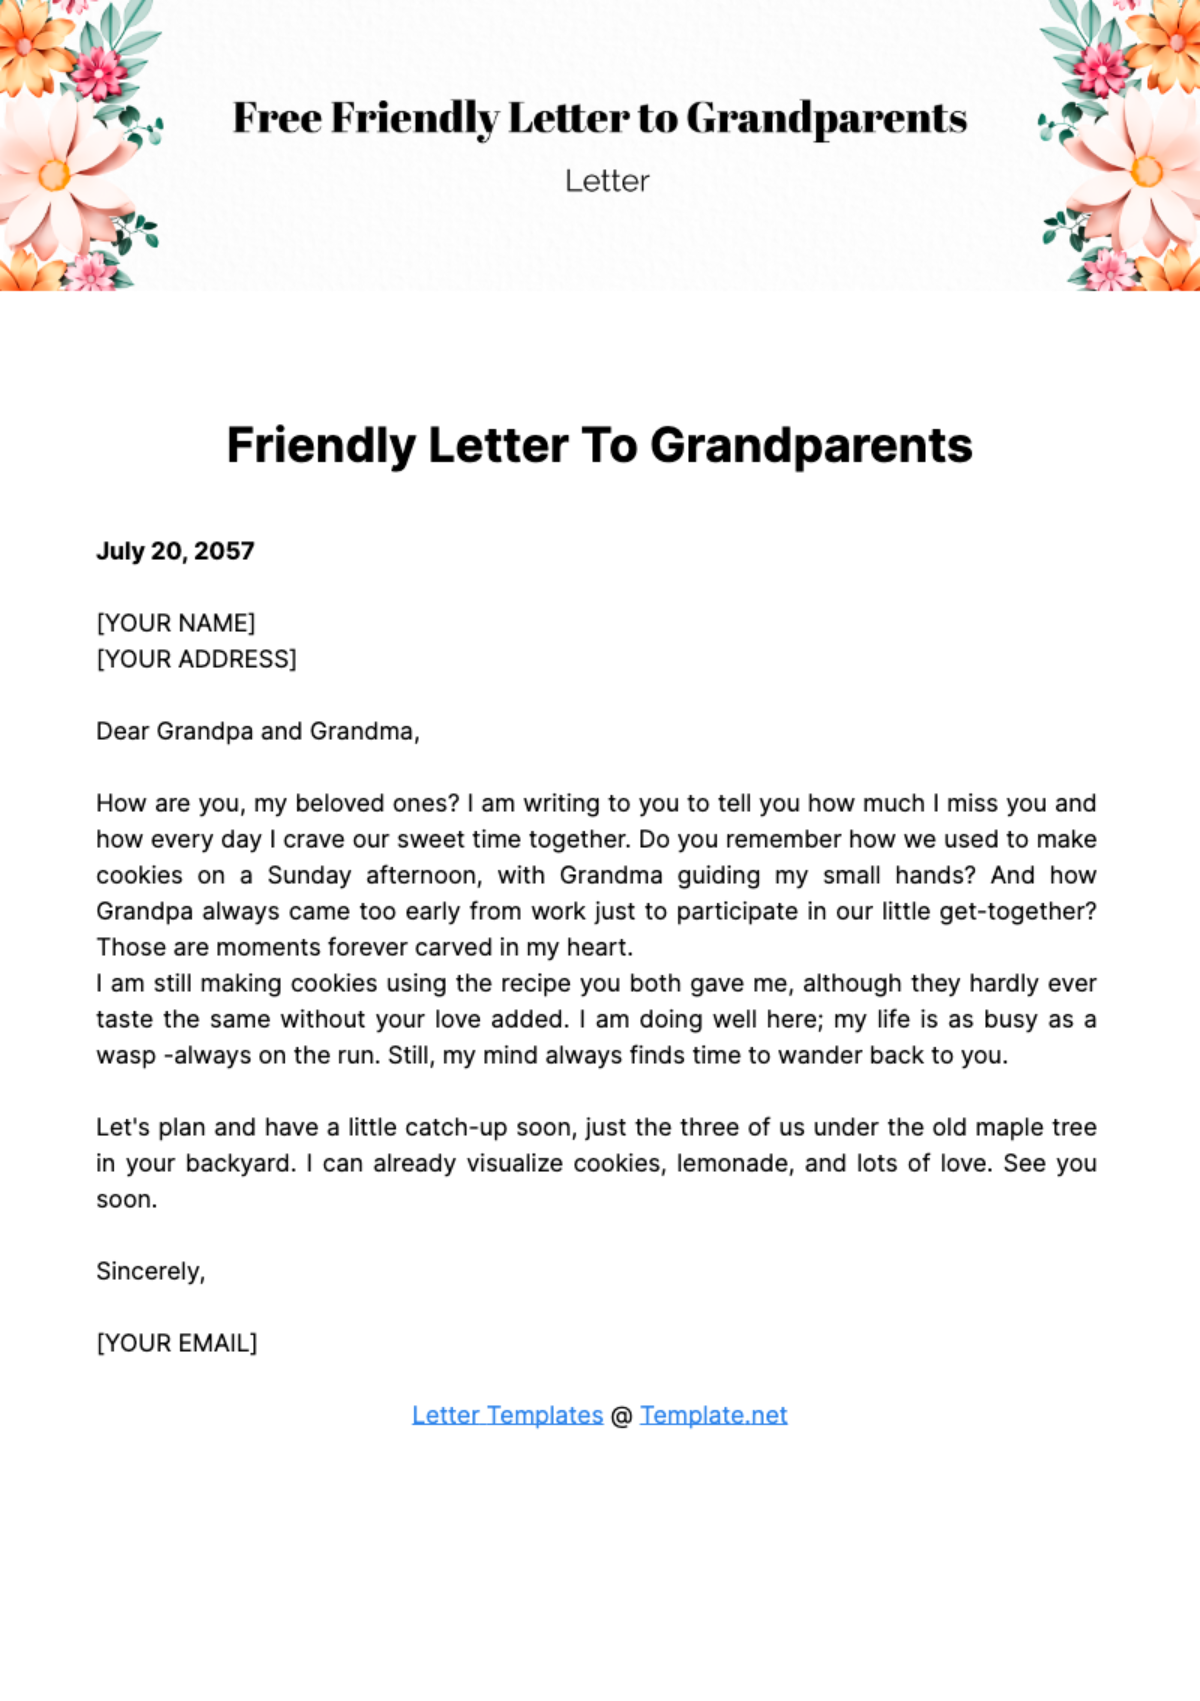 Free Friendly Letter to Grandparents Template